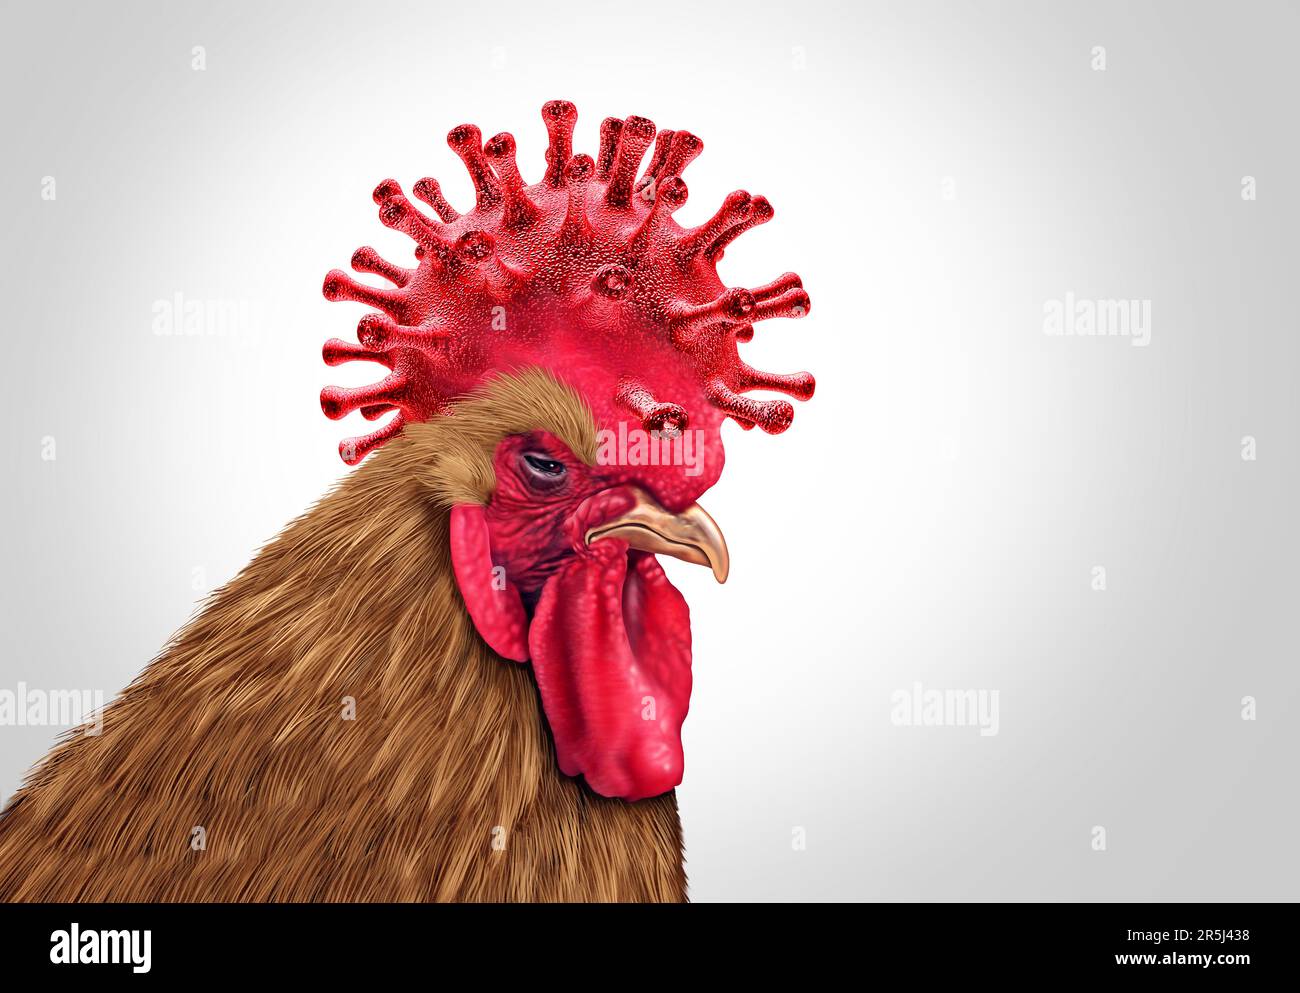 Bird Flu Virus outbreak and Avian influenza crisis as a poultry viral infected as chicken livestock as a health risk for global infection outbreaks Stock Photo